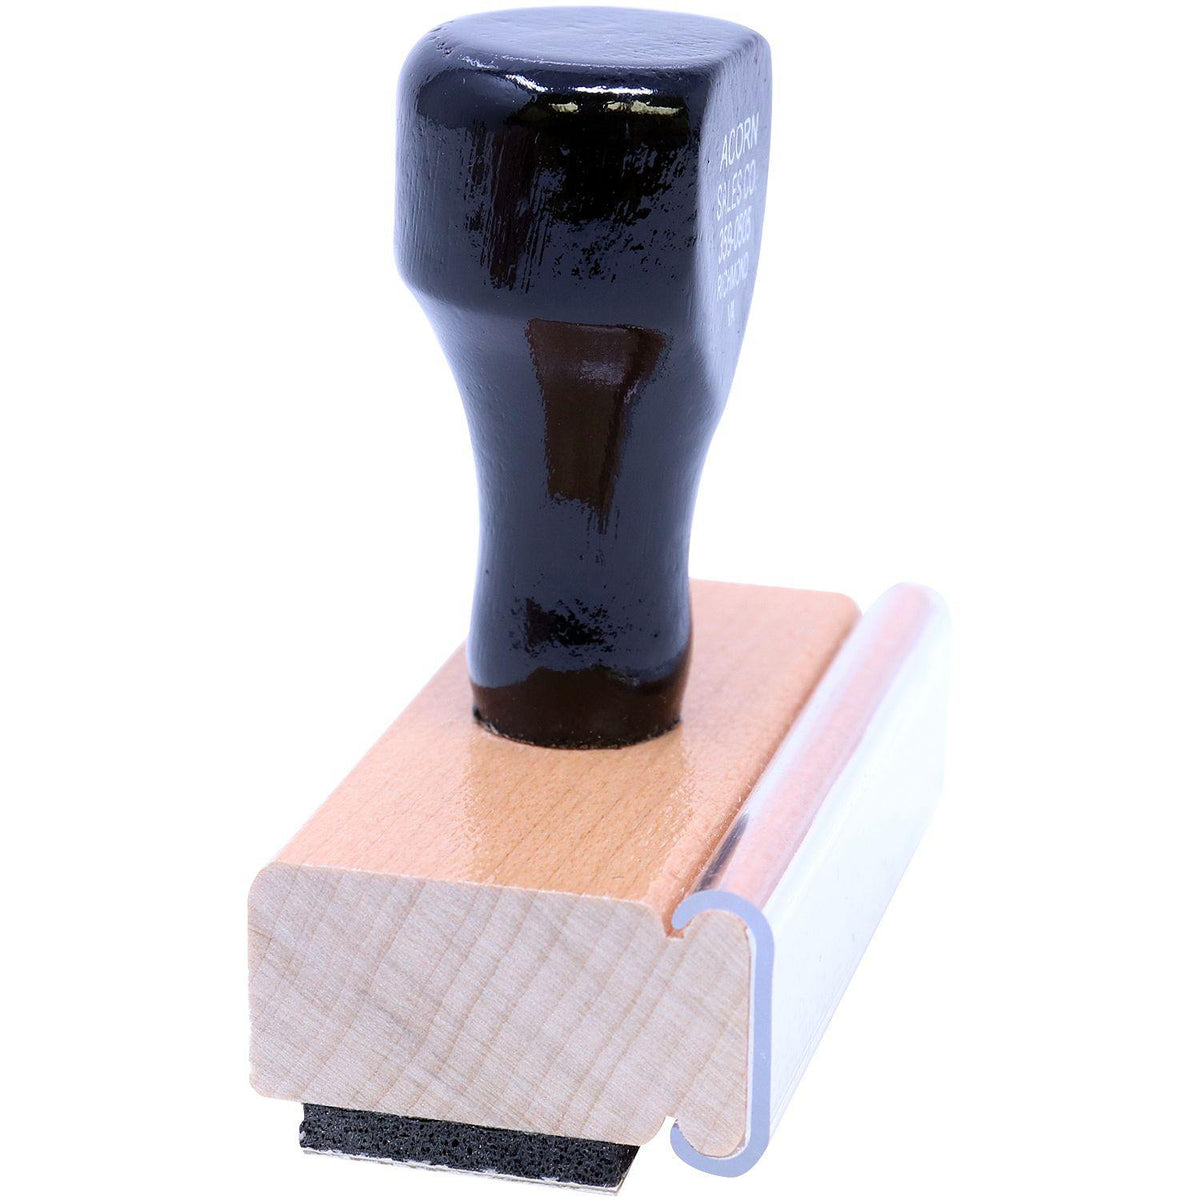 Large Urgent Rubber Stamp - Engineer Seal Stamps - Brand_Acorn, Impression Size_Large, Stamp Type_Regular Stamp, Type of Use_Office